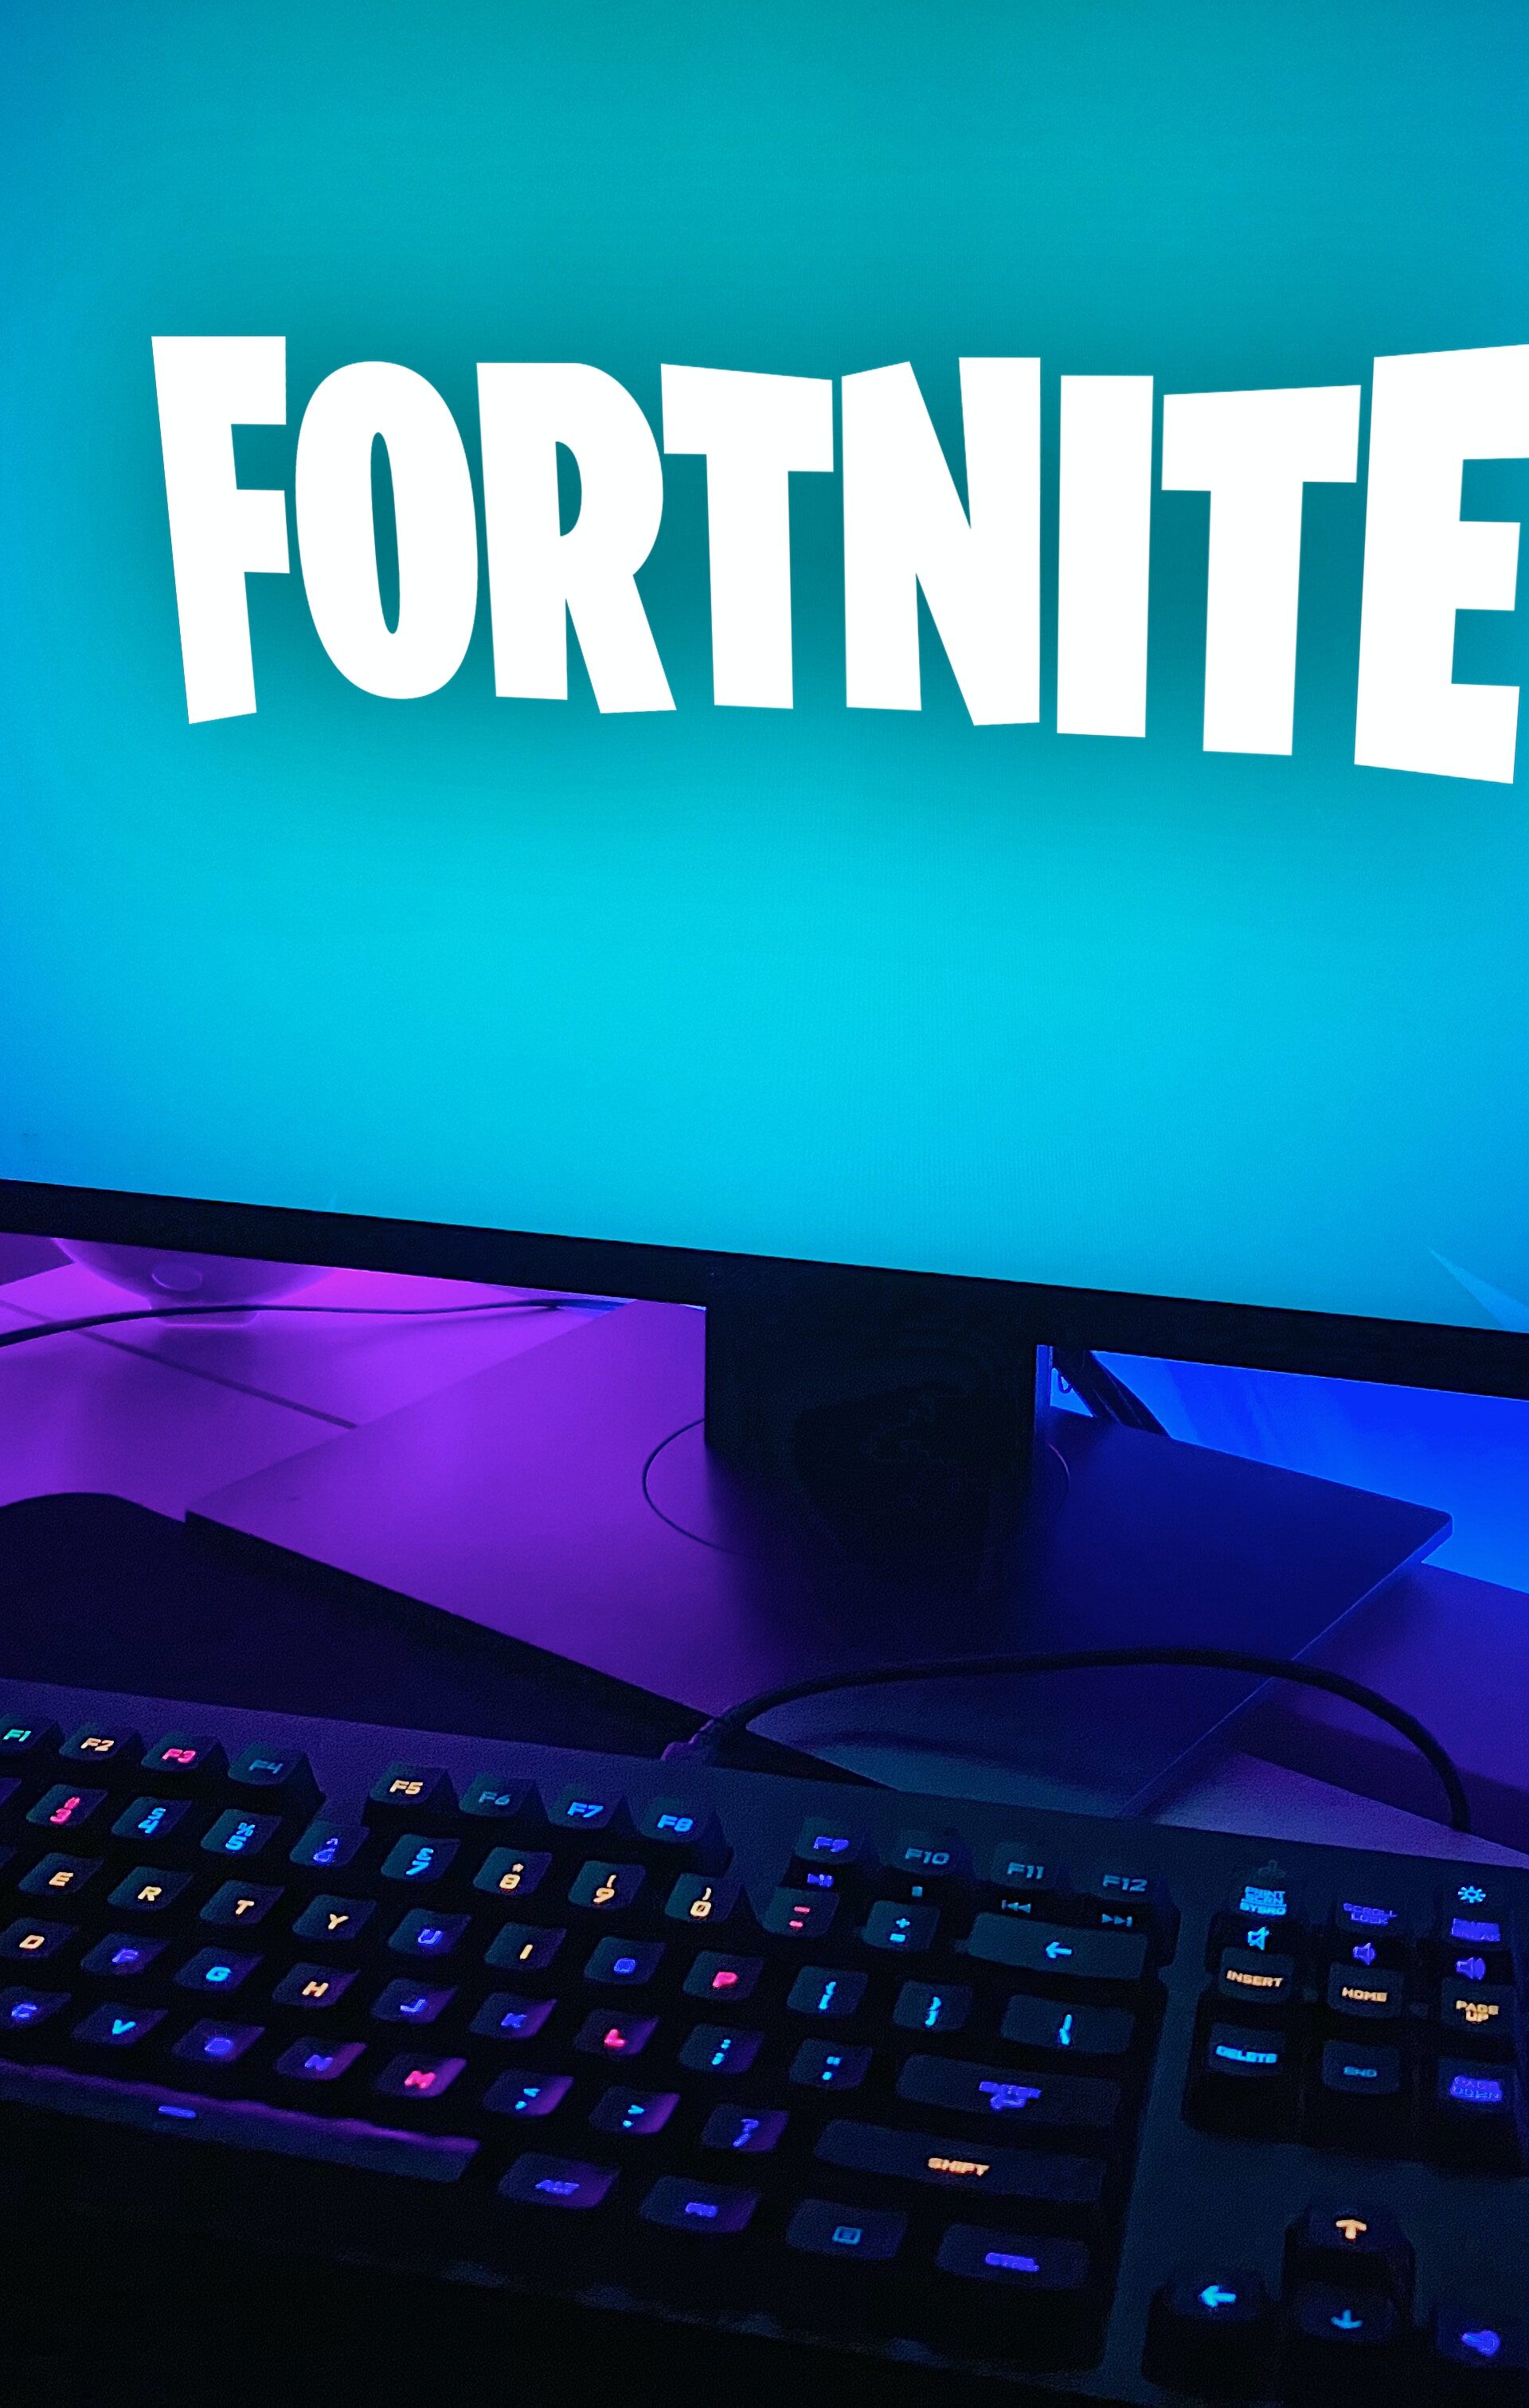 Unlock a safer digital world for your family. Learn how to block Fortnite on your router effectively. Create a balanced gaming routine. Take control today!